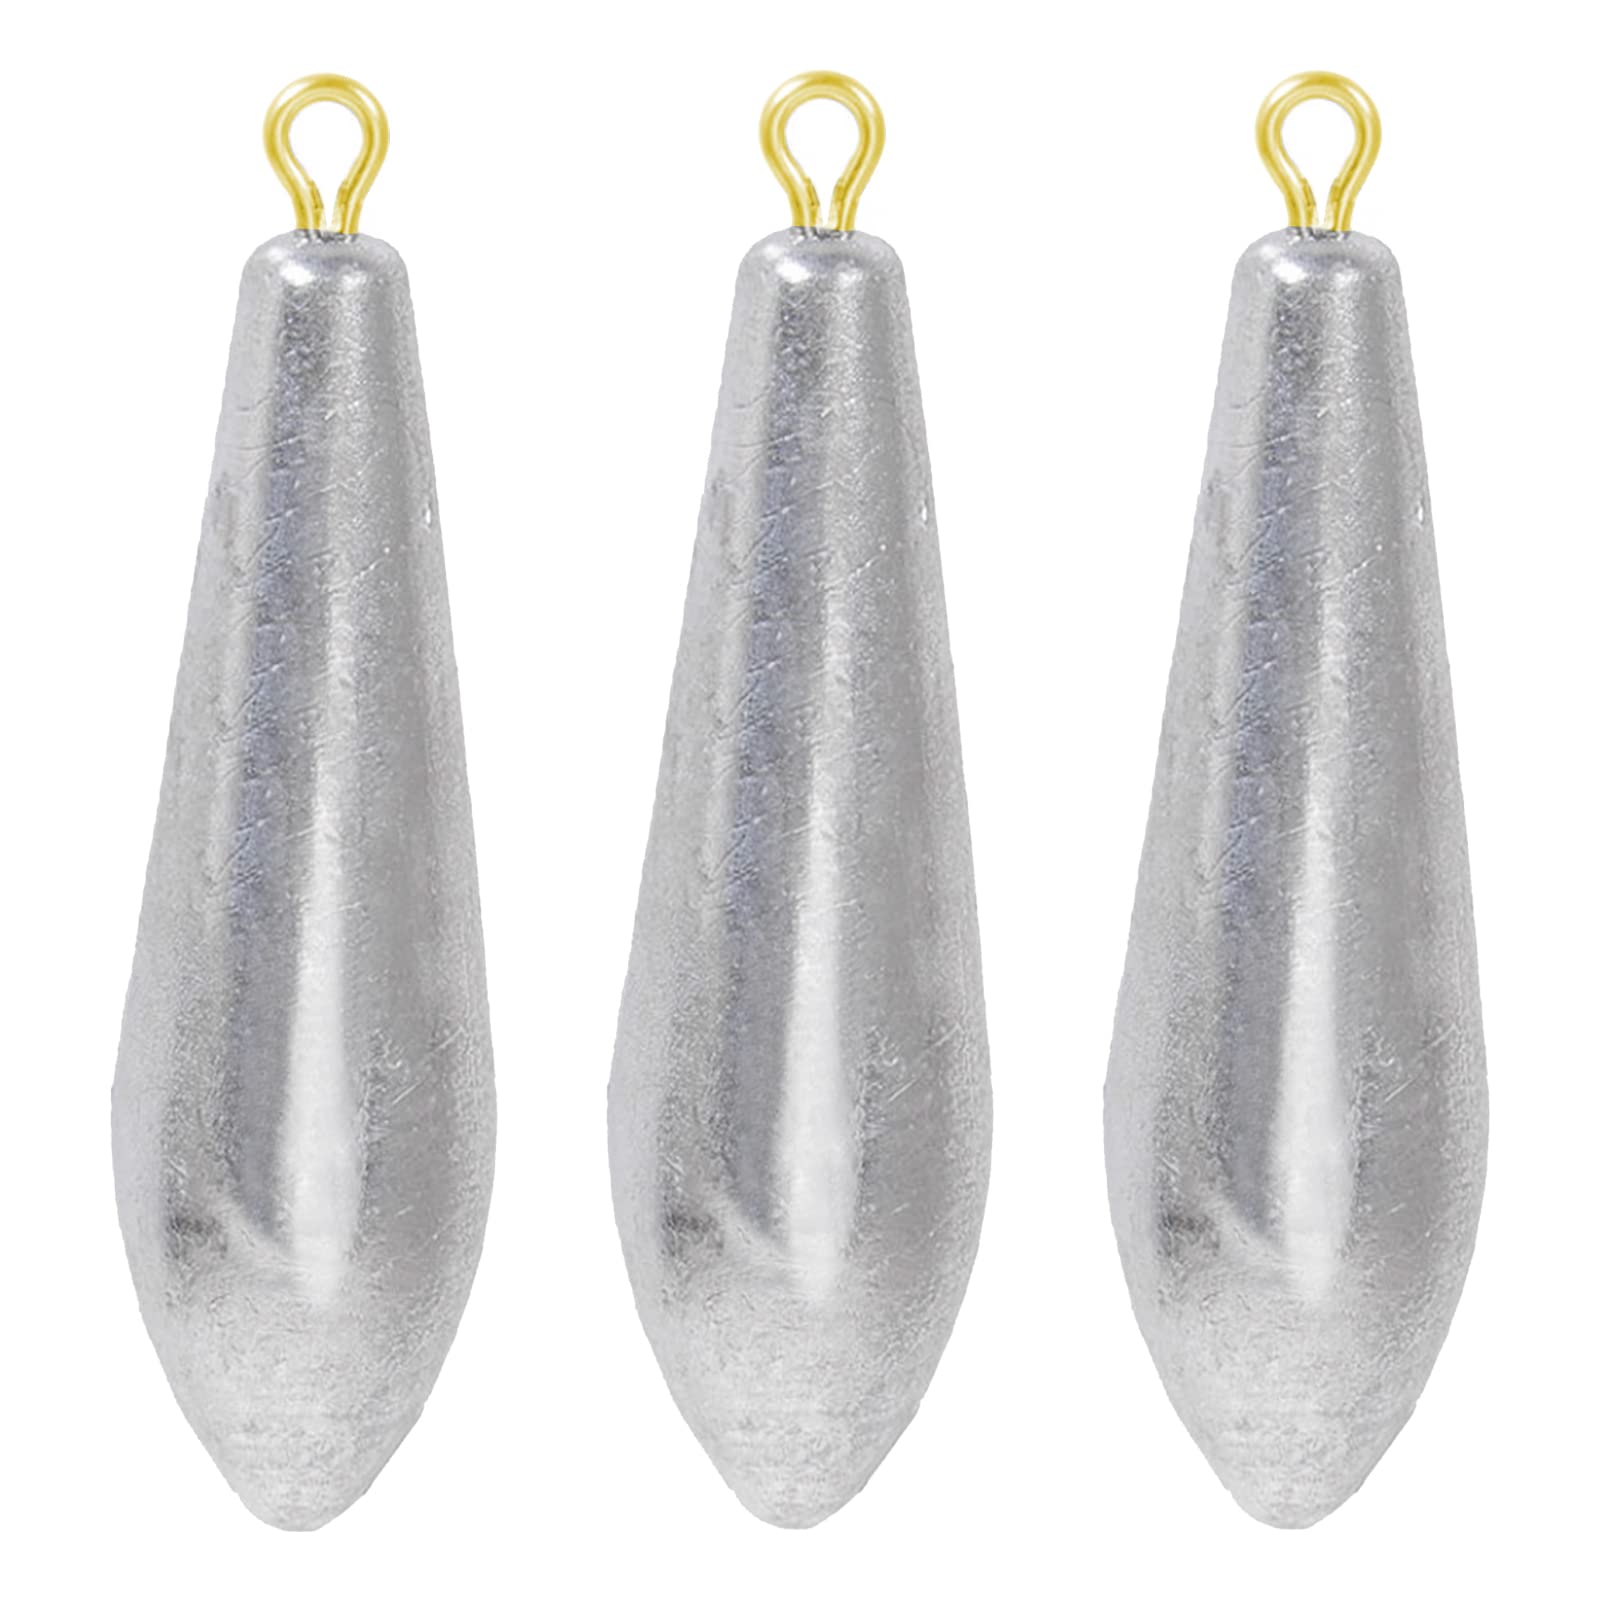 Flap Shaped Die Casting Fishing Weight Fishing Lead Sinkers